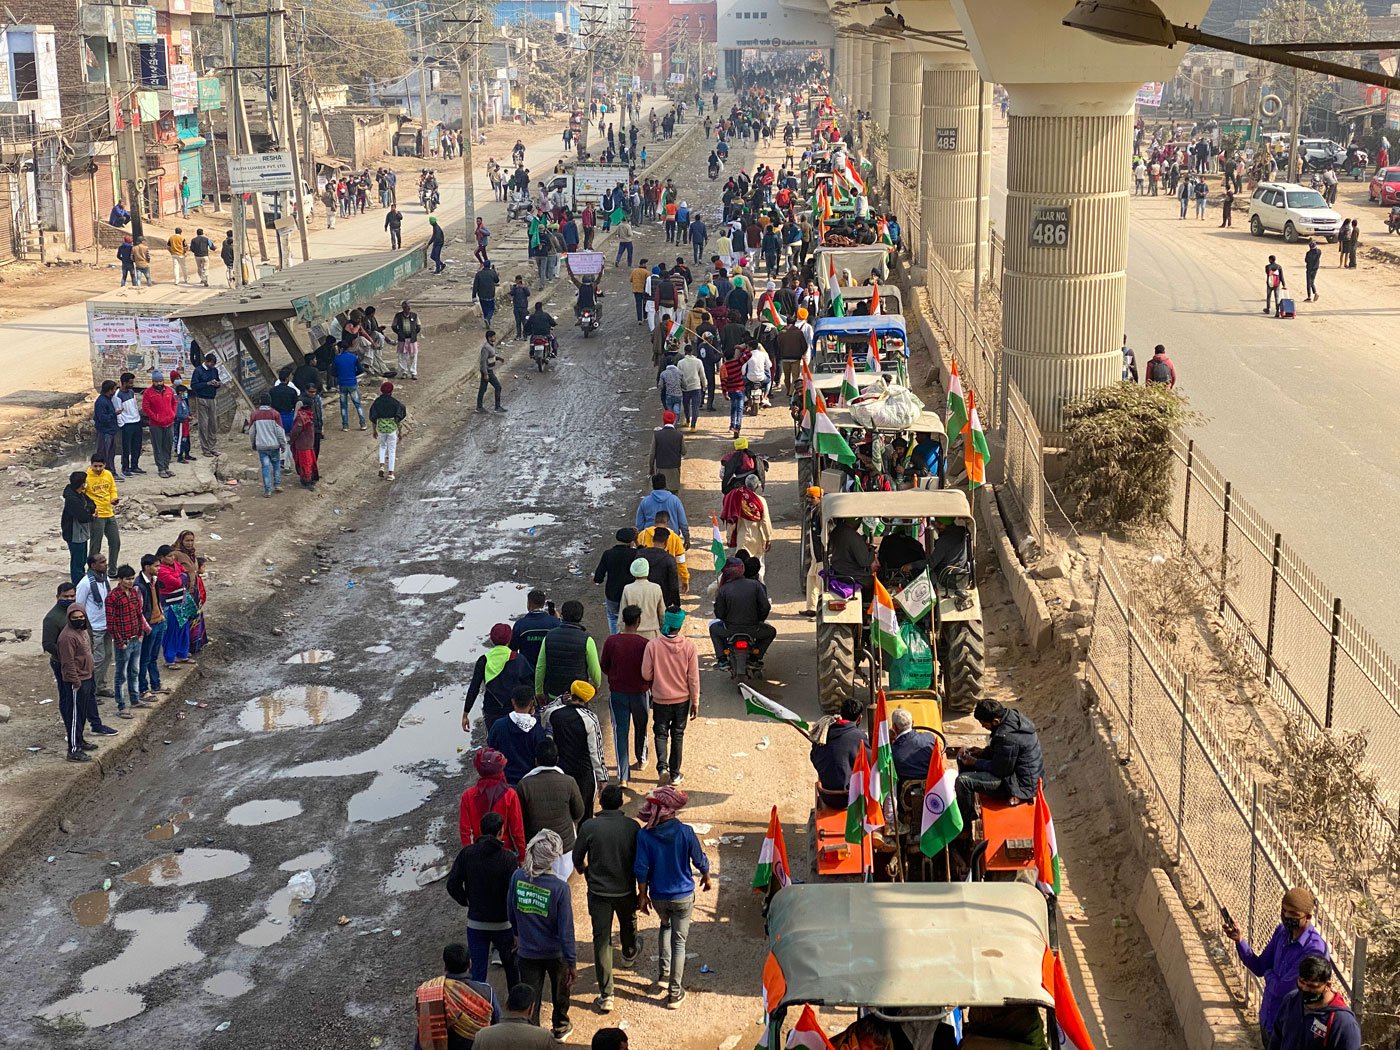 The convoy of farmers' tractors from Tikri was moving peacefully when a small group broke away, creating chaos at Nangloi chowk and disrupting an unprecedented and disciplined citizen’s Republic Day parade